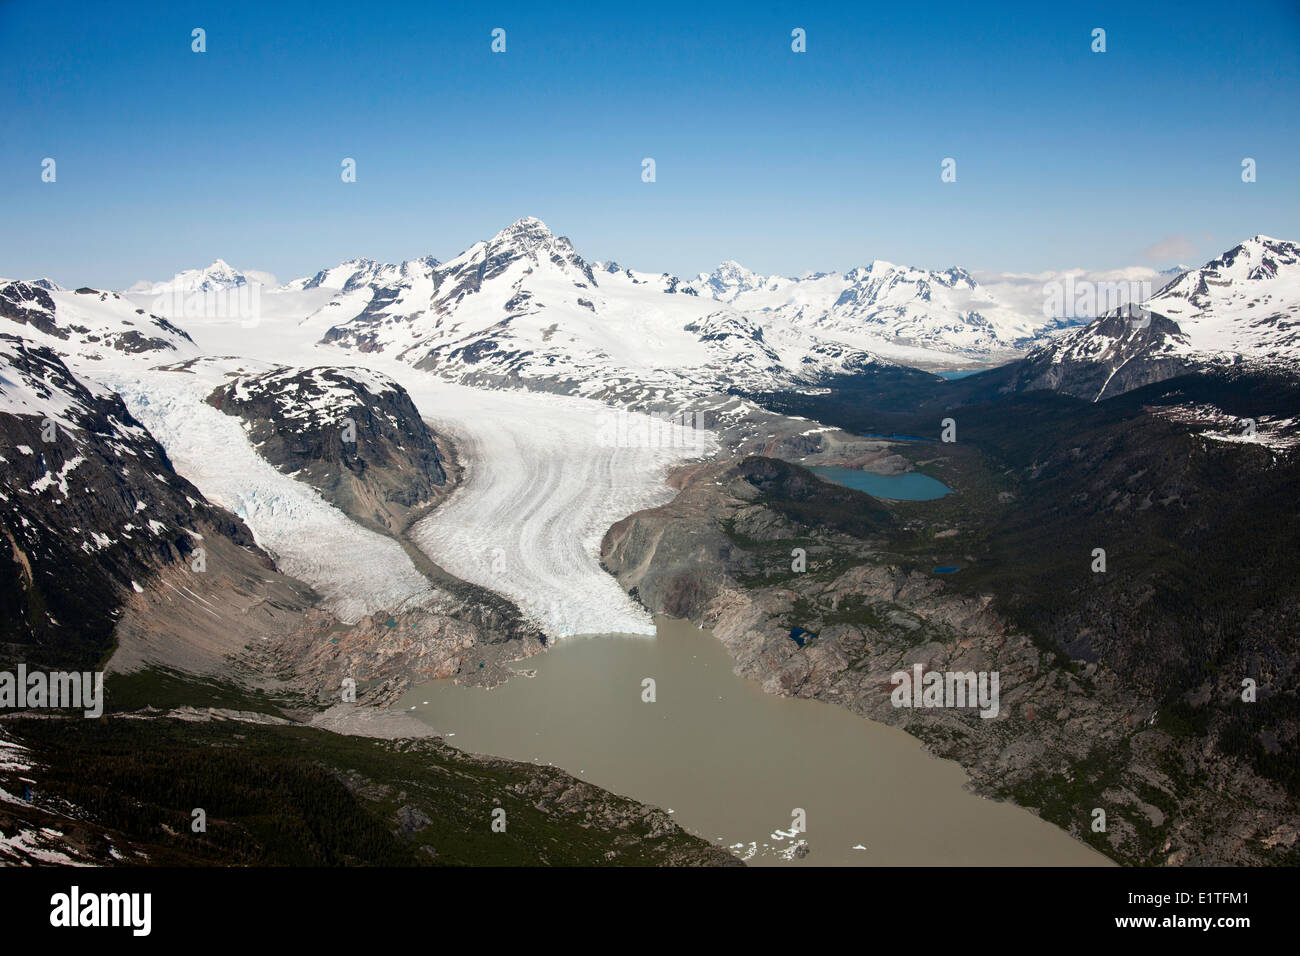 Aerial landscape of the Coast Mountains in British Columbia Canada Stock Photo